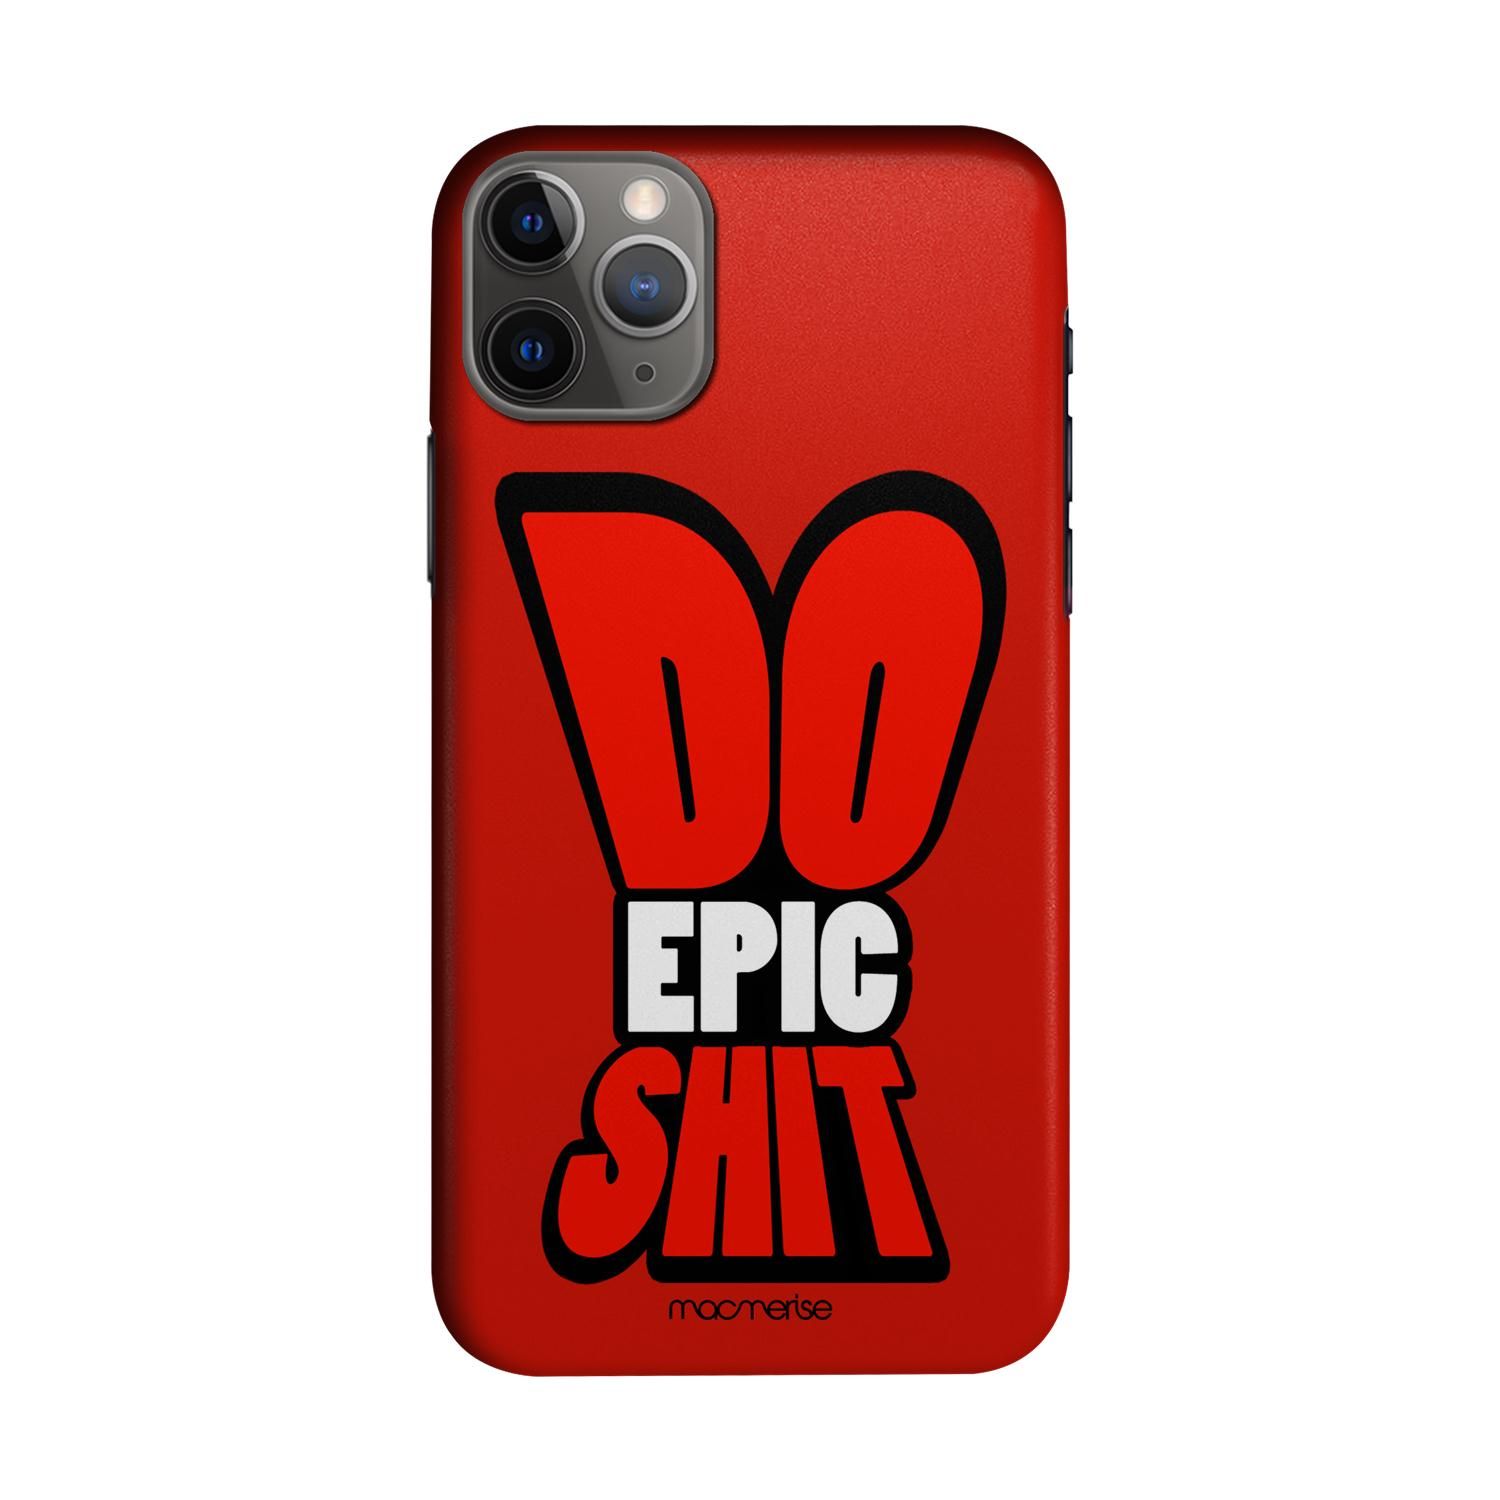 Buy Do Epic Shit - Sleek Phone Case for iPhone 11 Pro Max Online